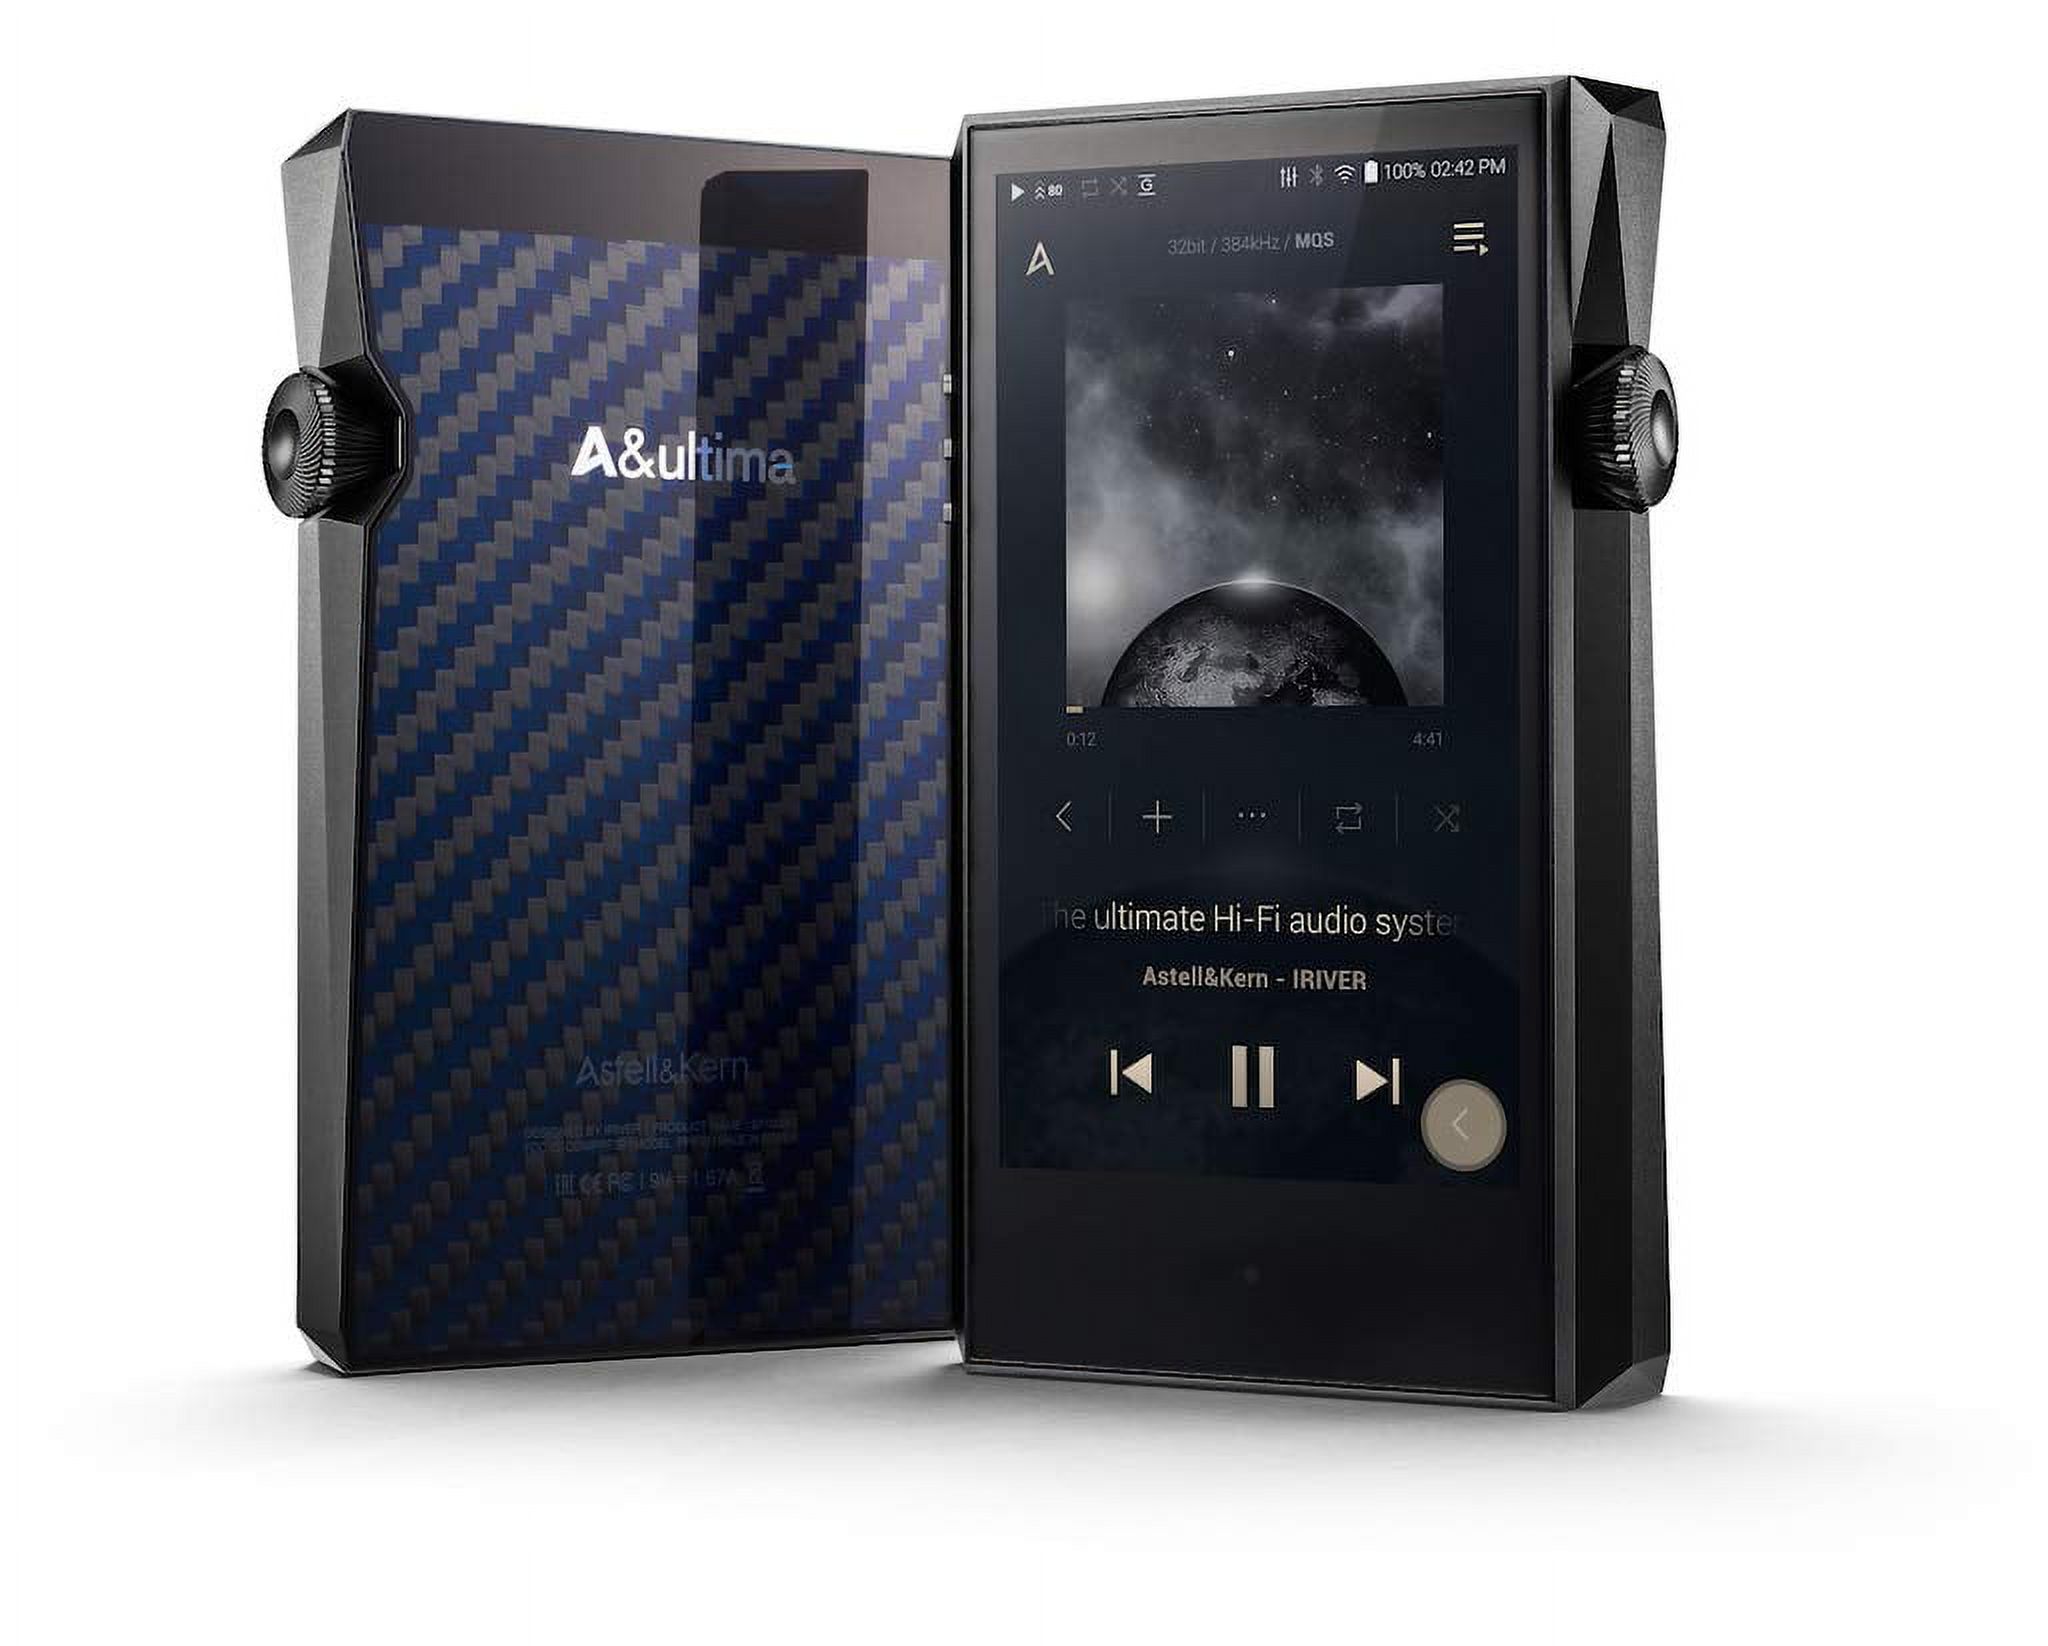 Astell&Kern A&Ultima SP1000M High Resolution Audio Player, Onyx Black É - image 4 of 5